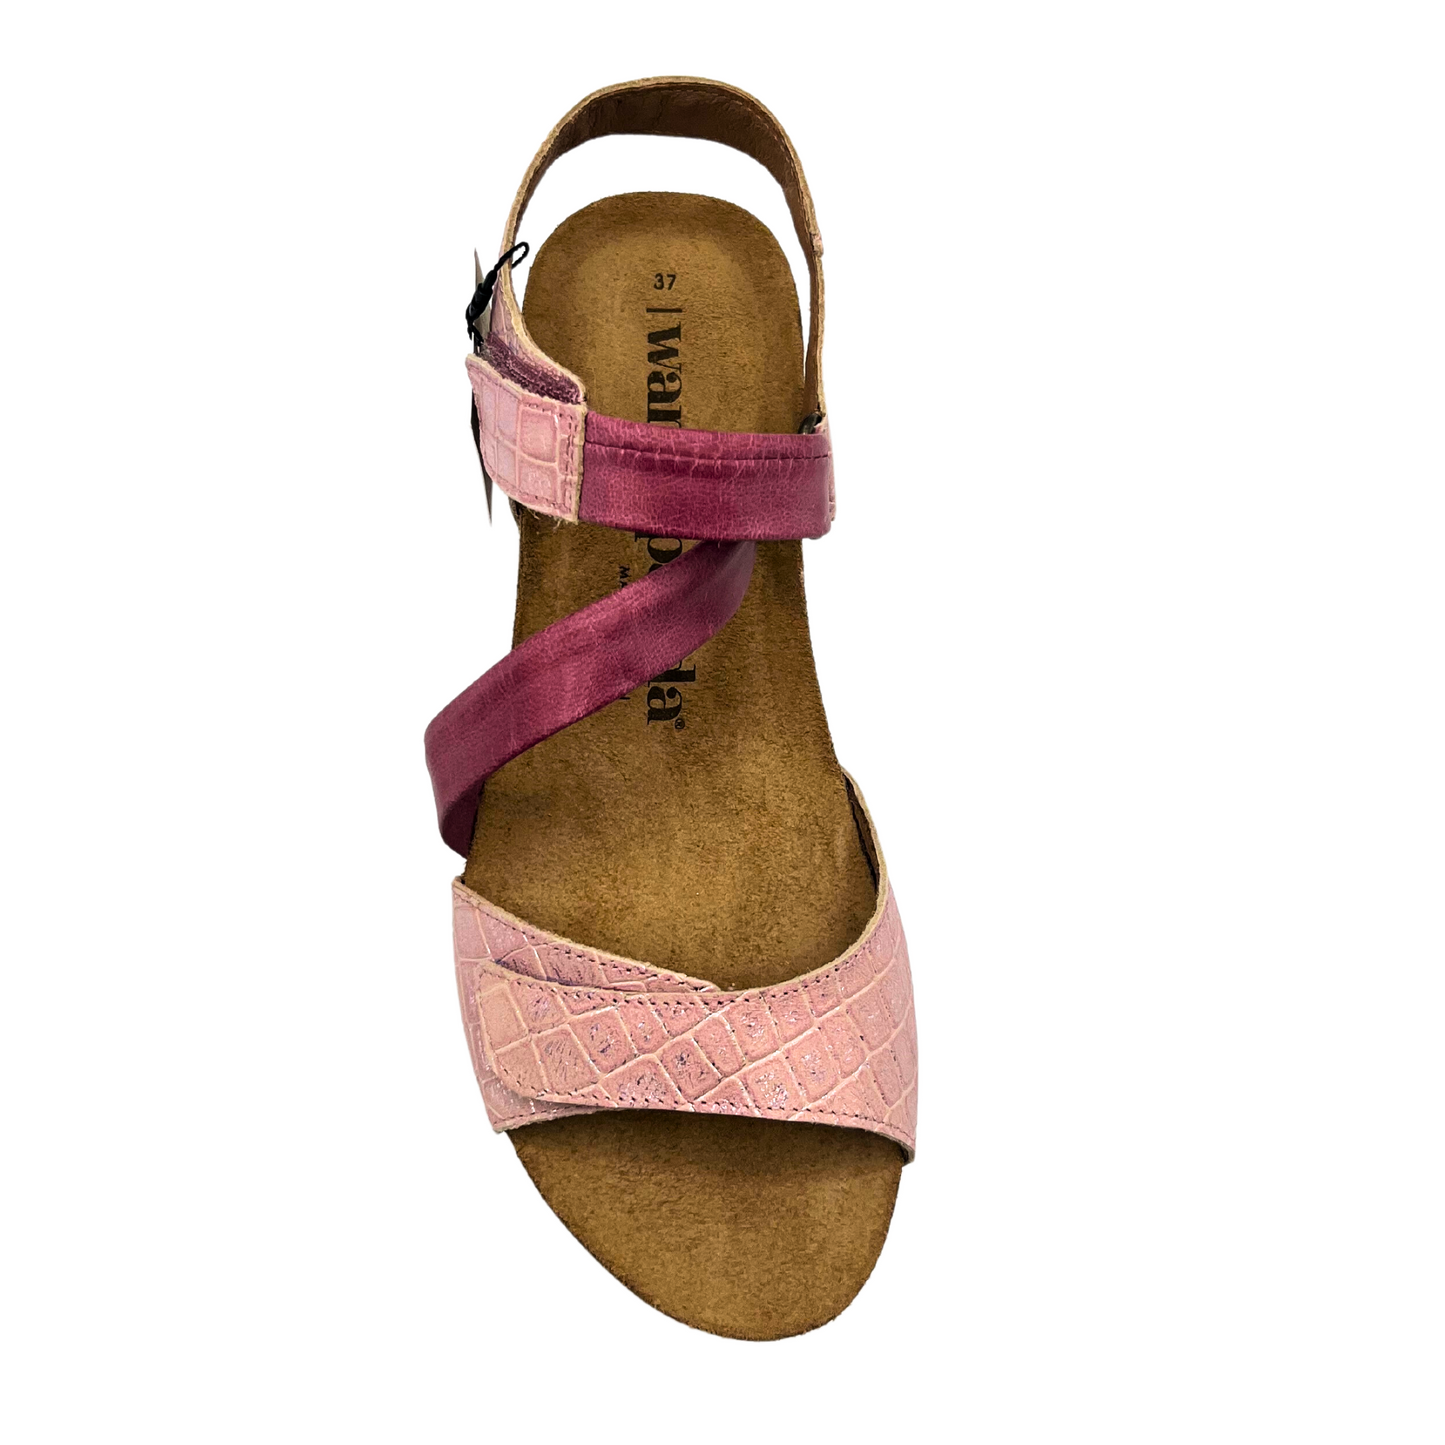 Top down view of a light pink sandal with a croco leather.  Cross strap is a smooth leather in a darker shade of pink.  Open toe and open heel.  Back strap with adjustable tab